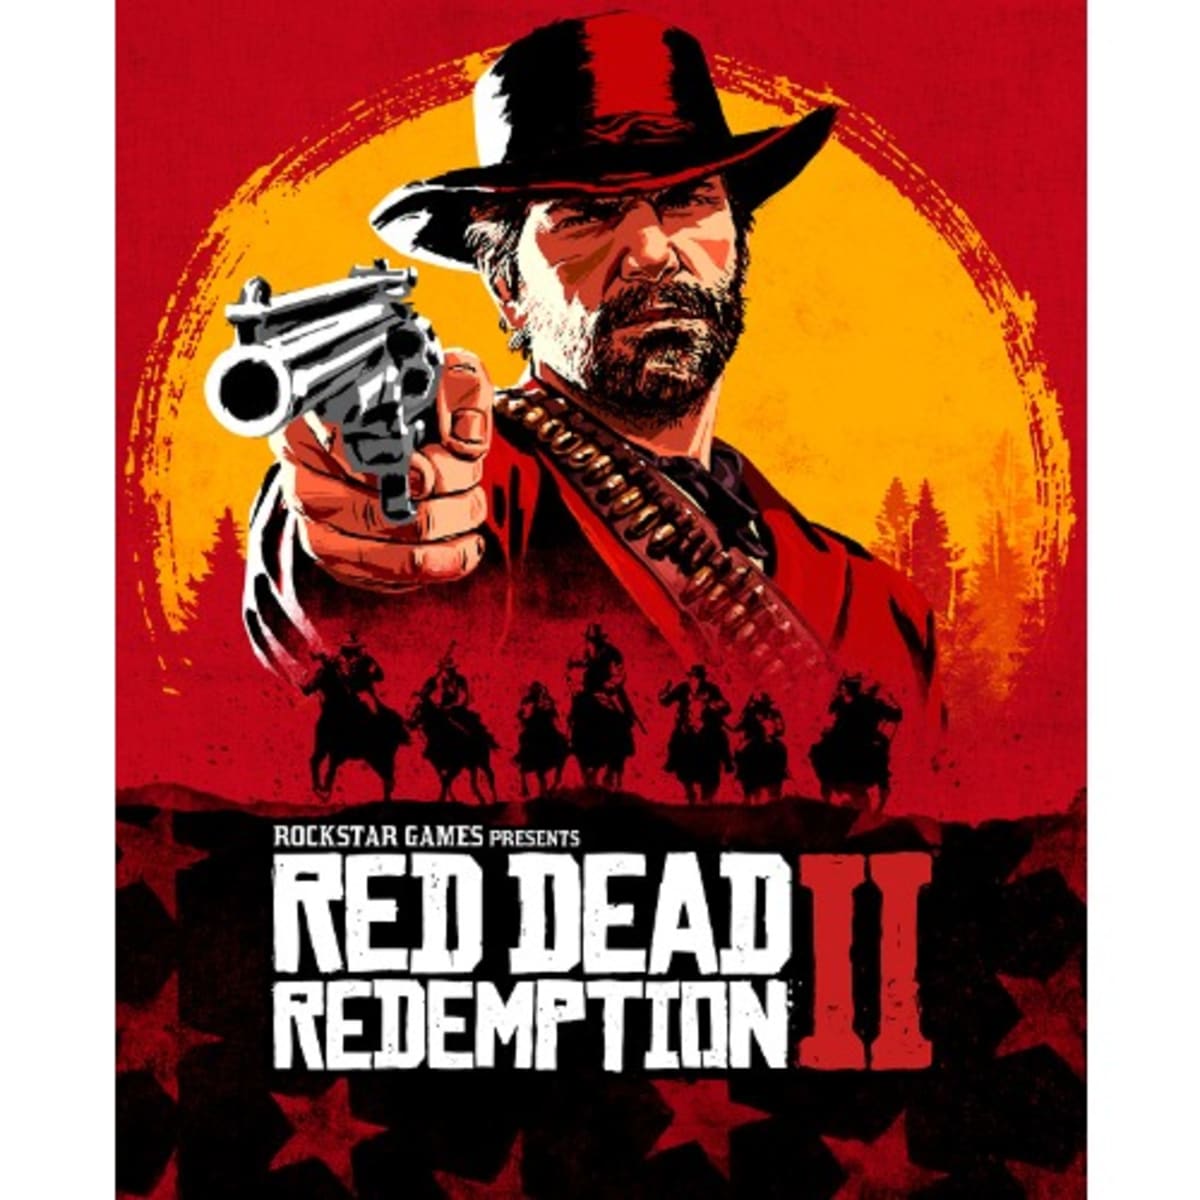 Dead Redemption 2 Pc Game | Konga Shopping